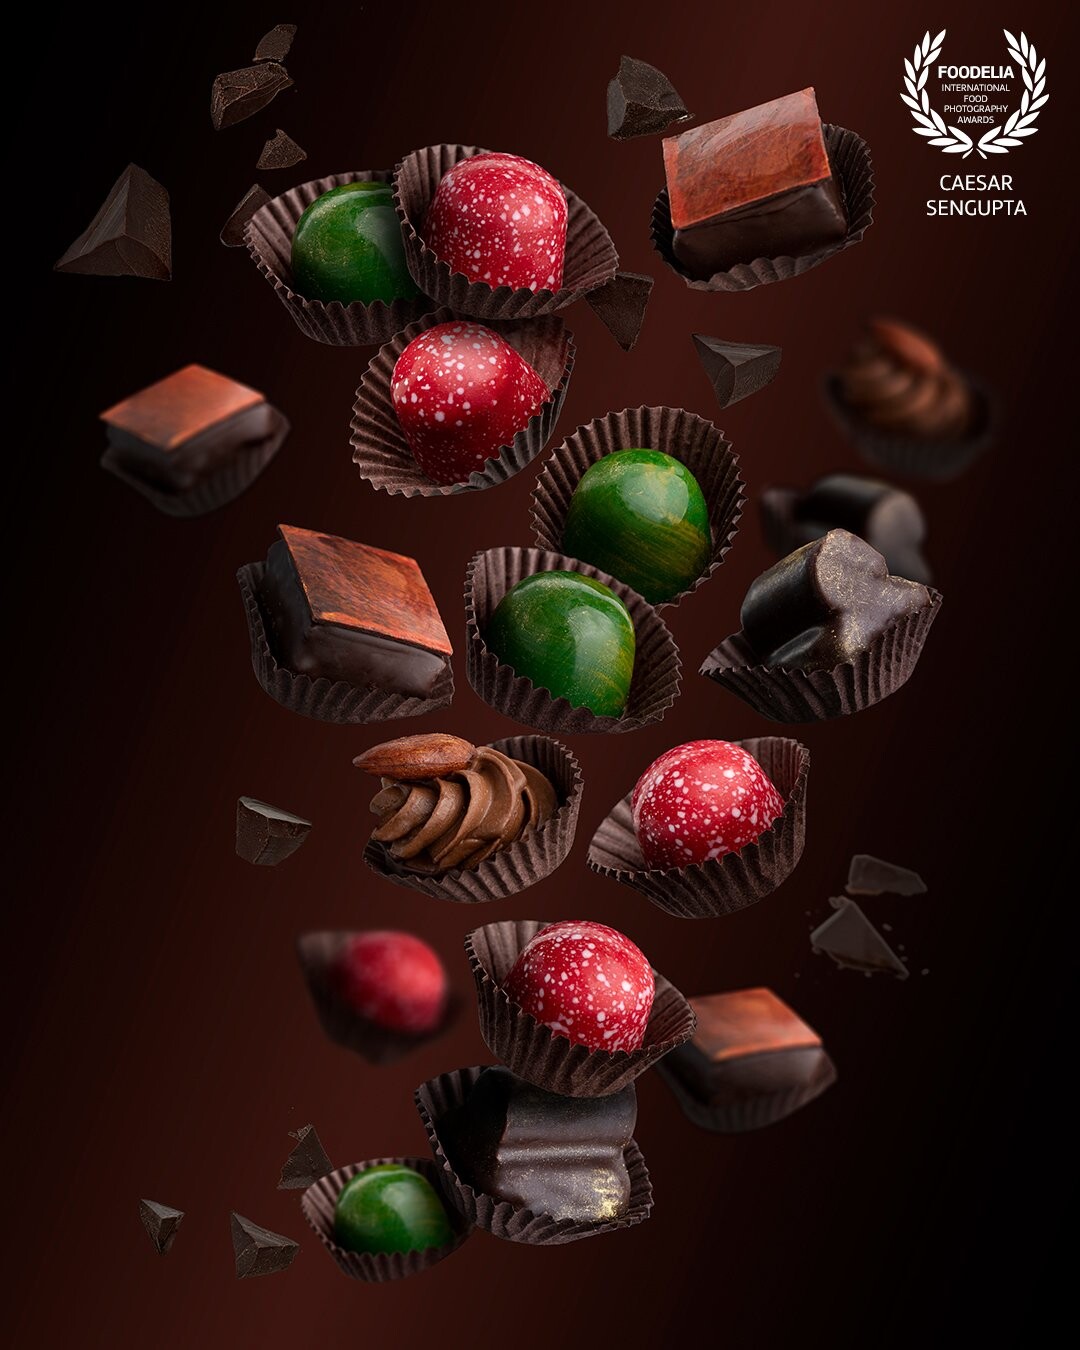 Chocolates are very interesting subjects for levitation photography. A dark and moody levitation image, where I would a create a sense of an explosion using a composite images with these chocolates.